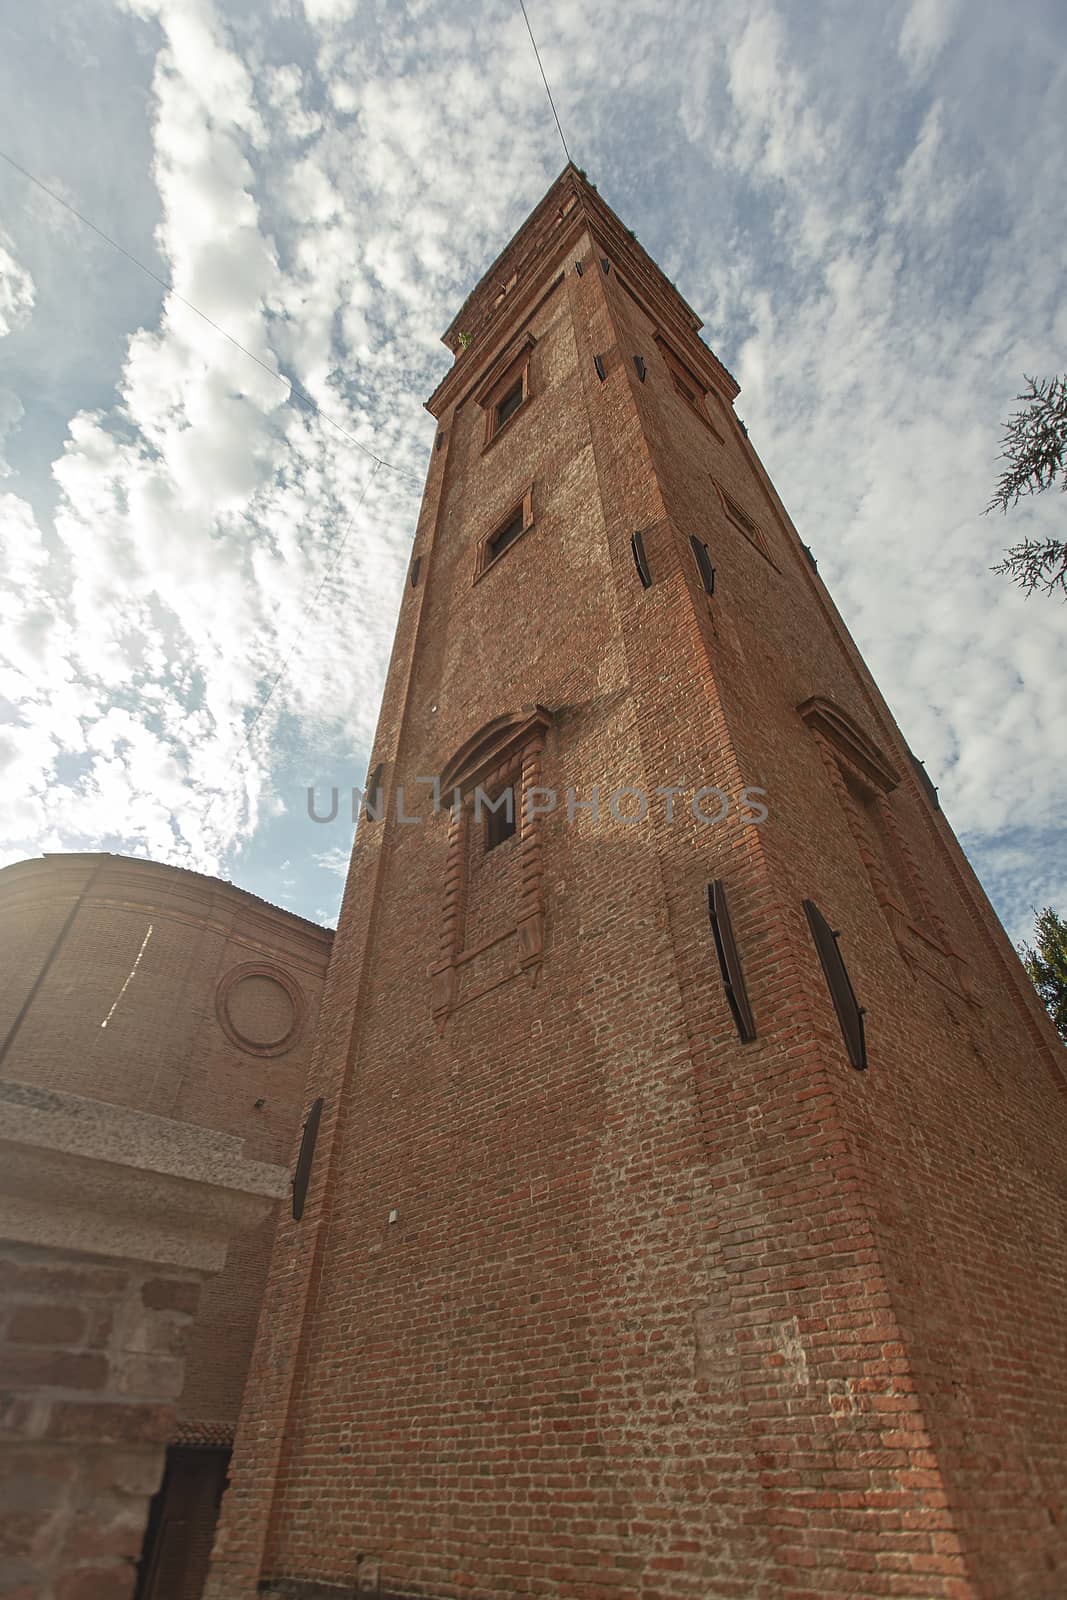 San Benedetto abate Church in Ferrara in Italy by pippocarlot